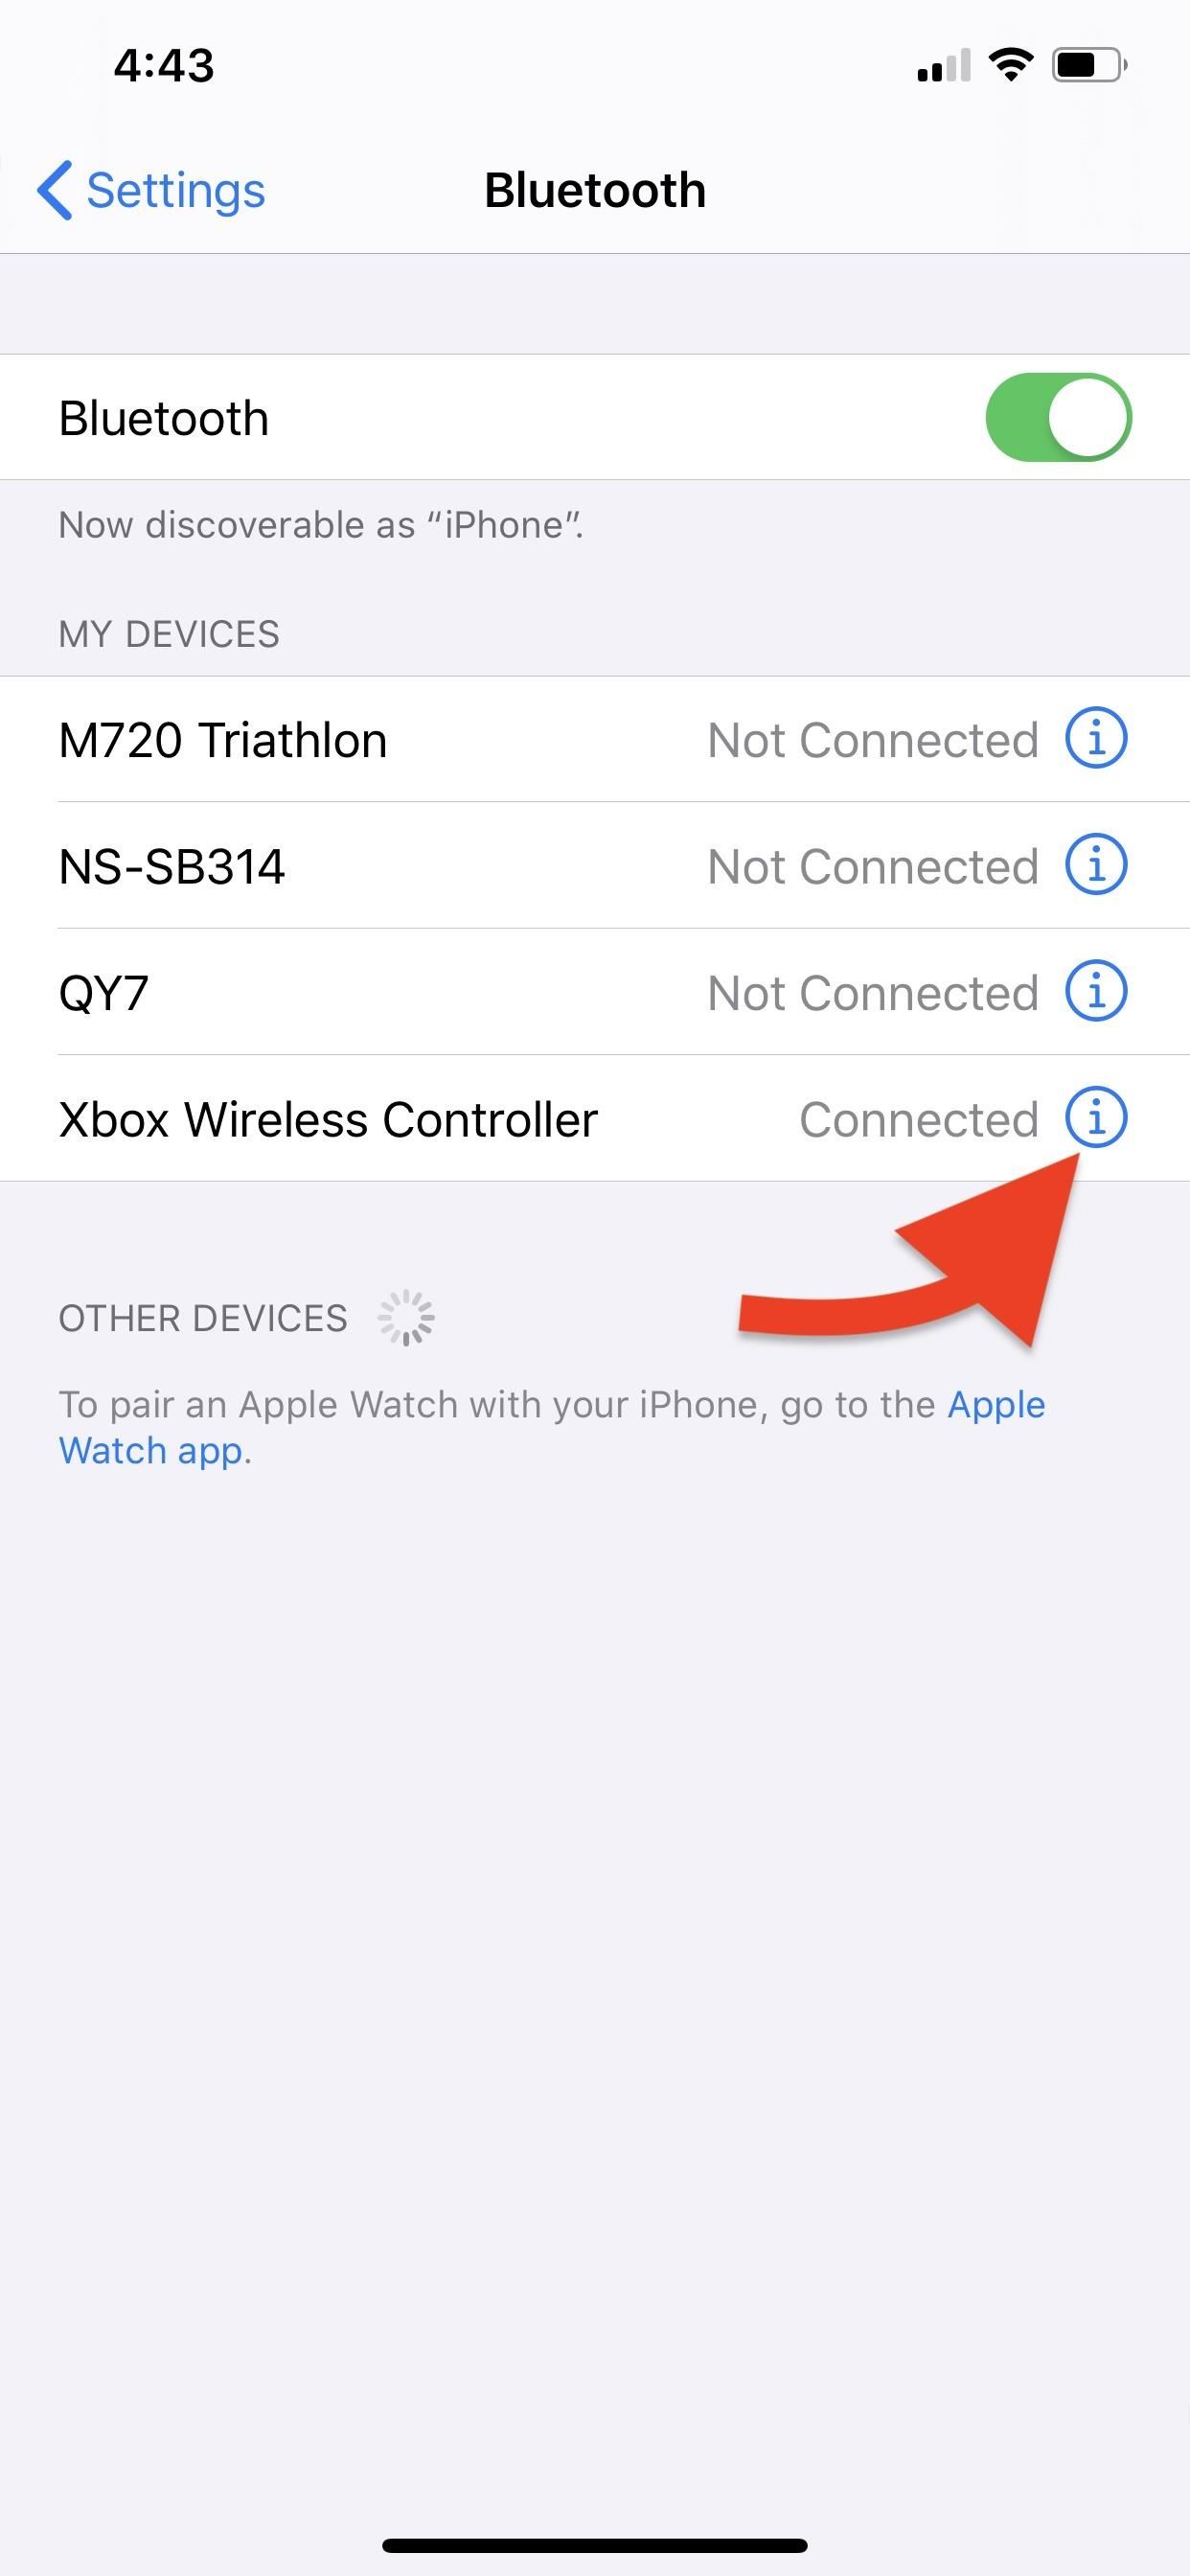 How to Connect Your Xbox Wireless Controller to Your iPhone to Play Games More Easily